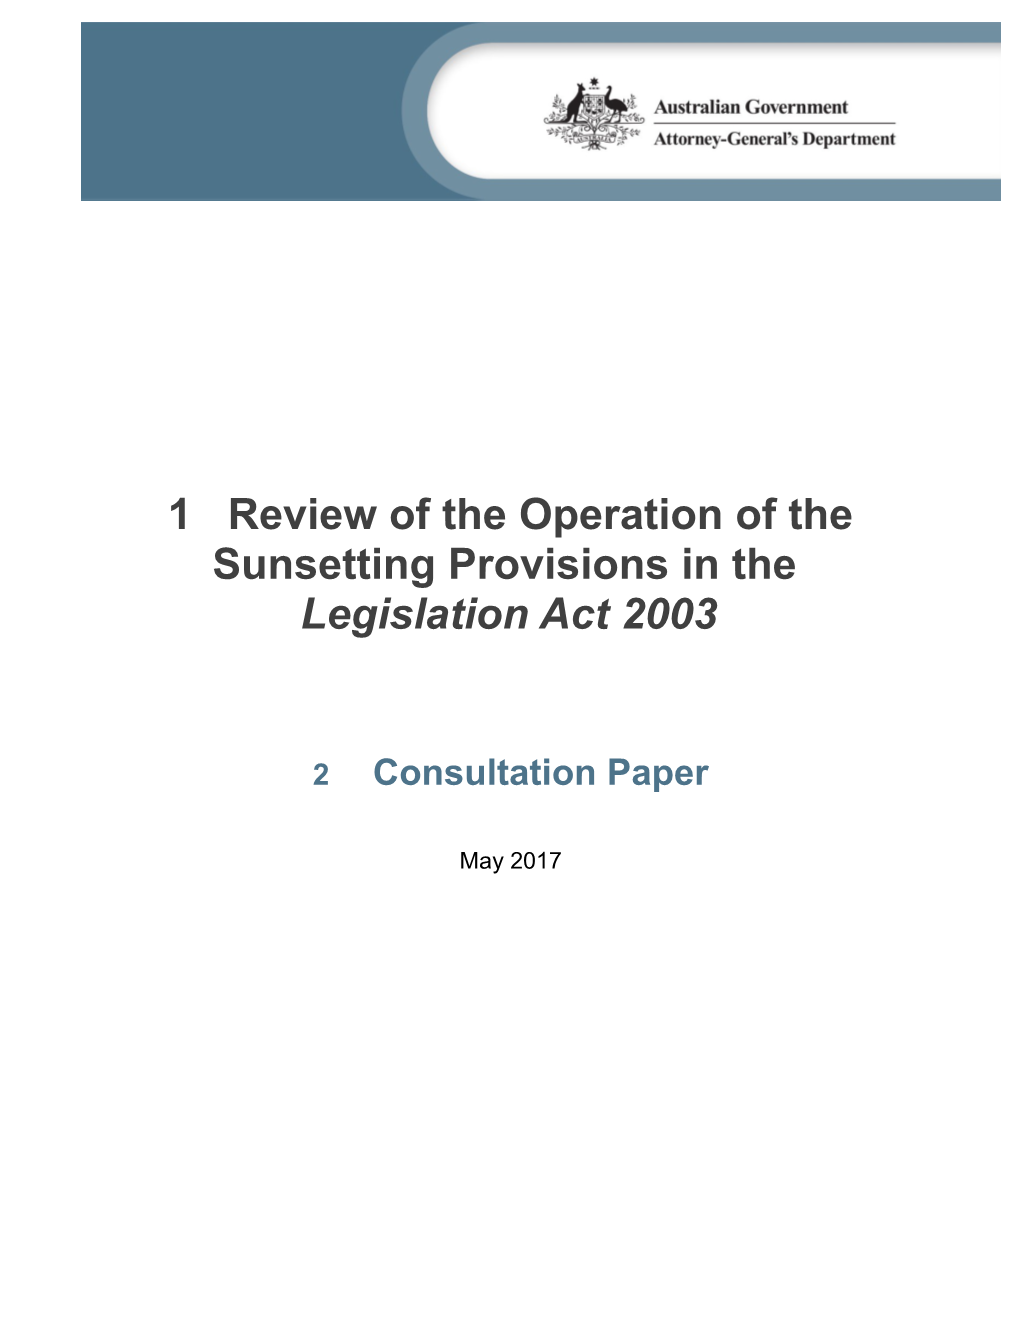 Review of the Operation of the Sunsetting Provisions